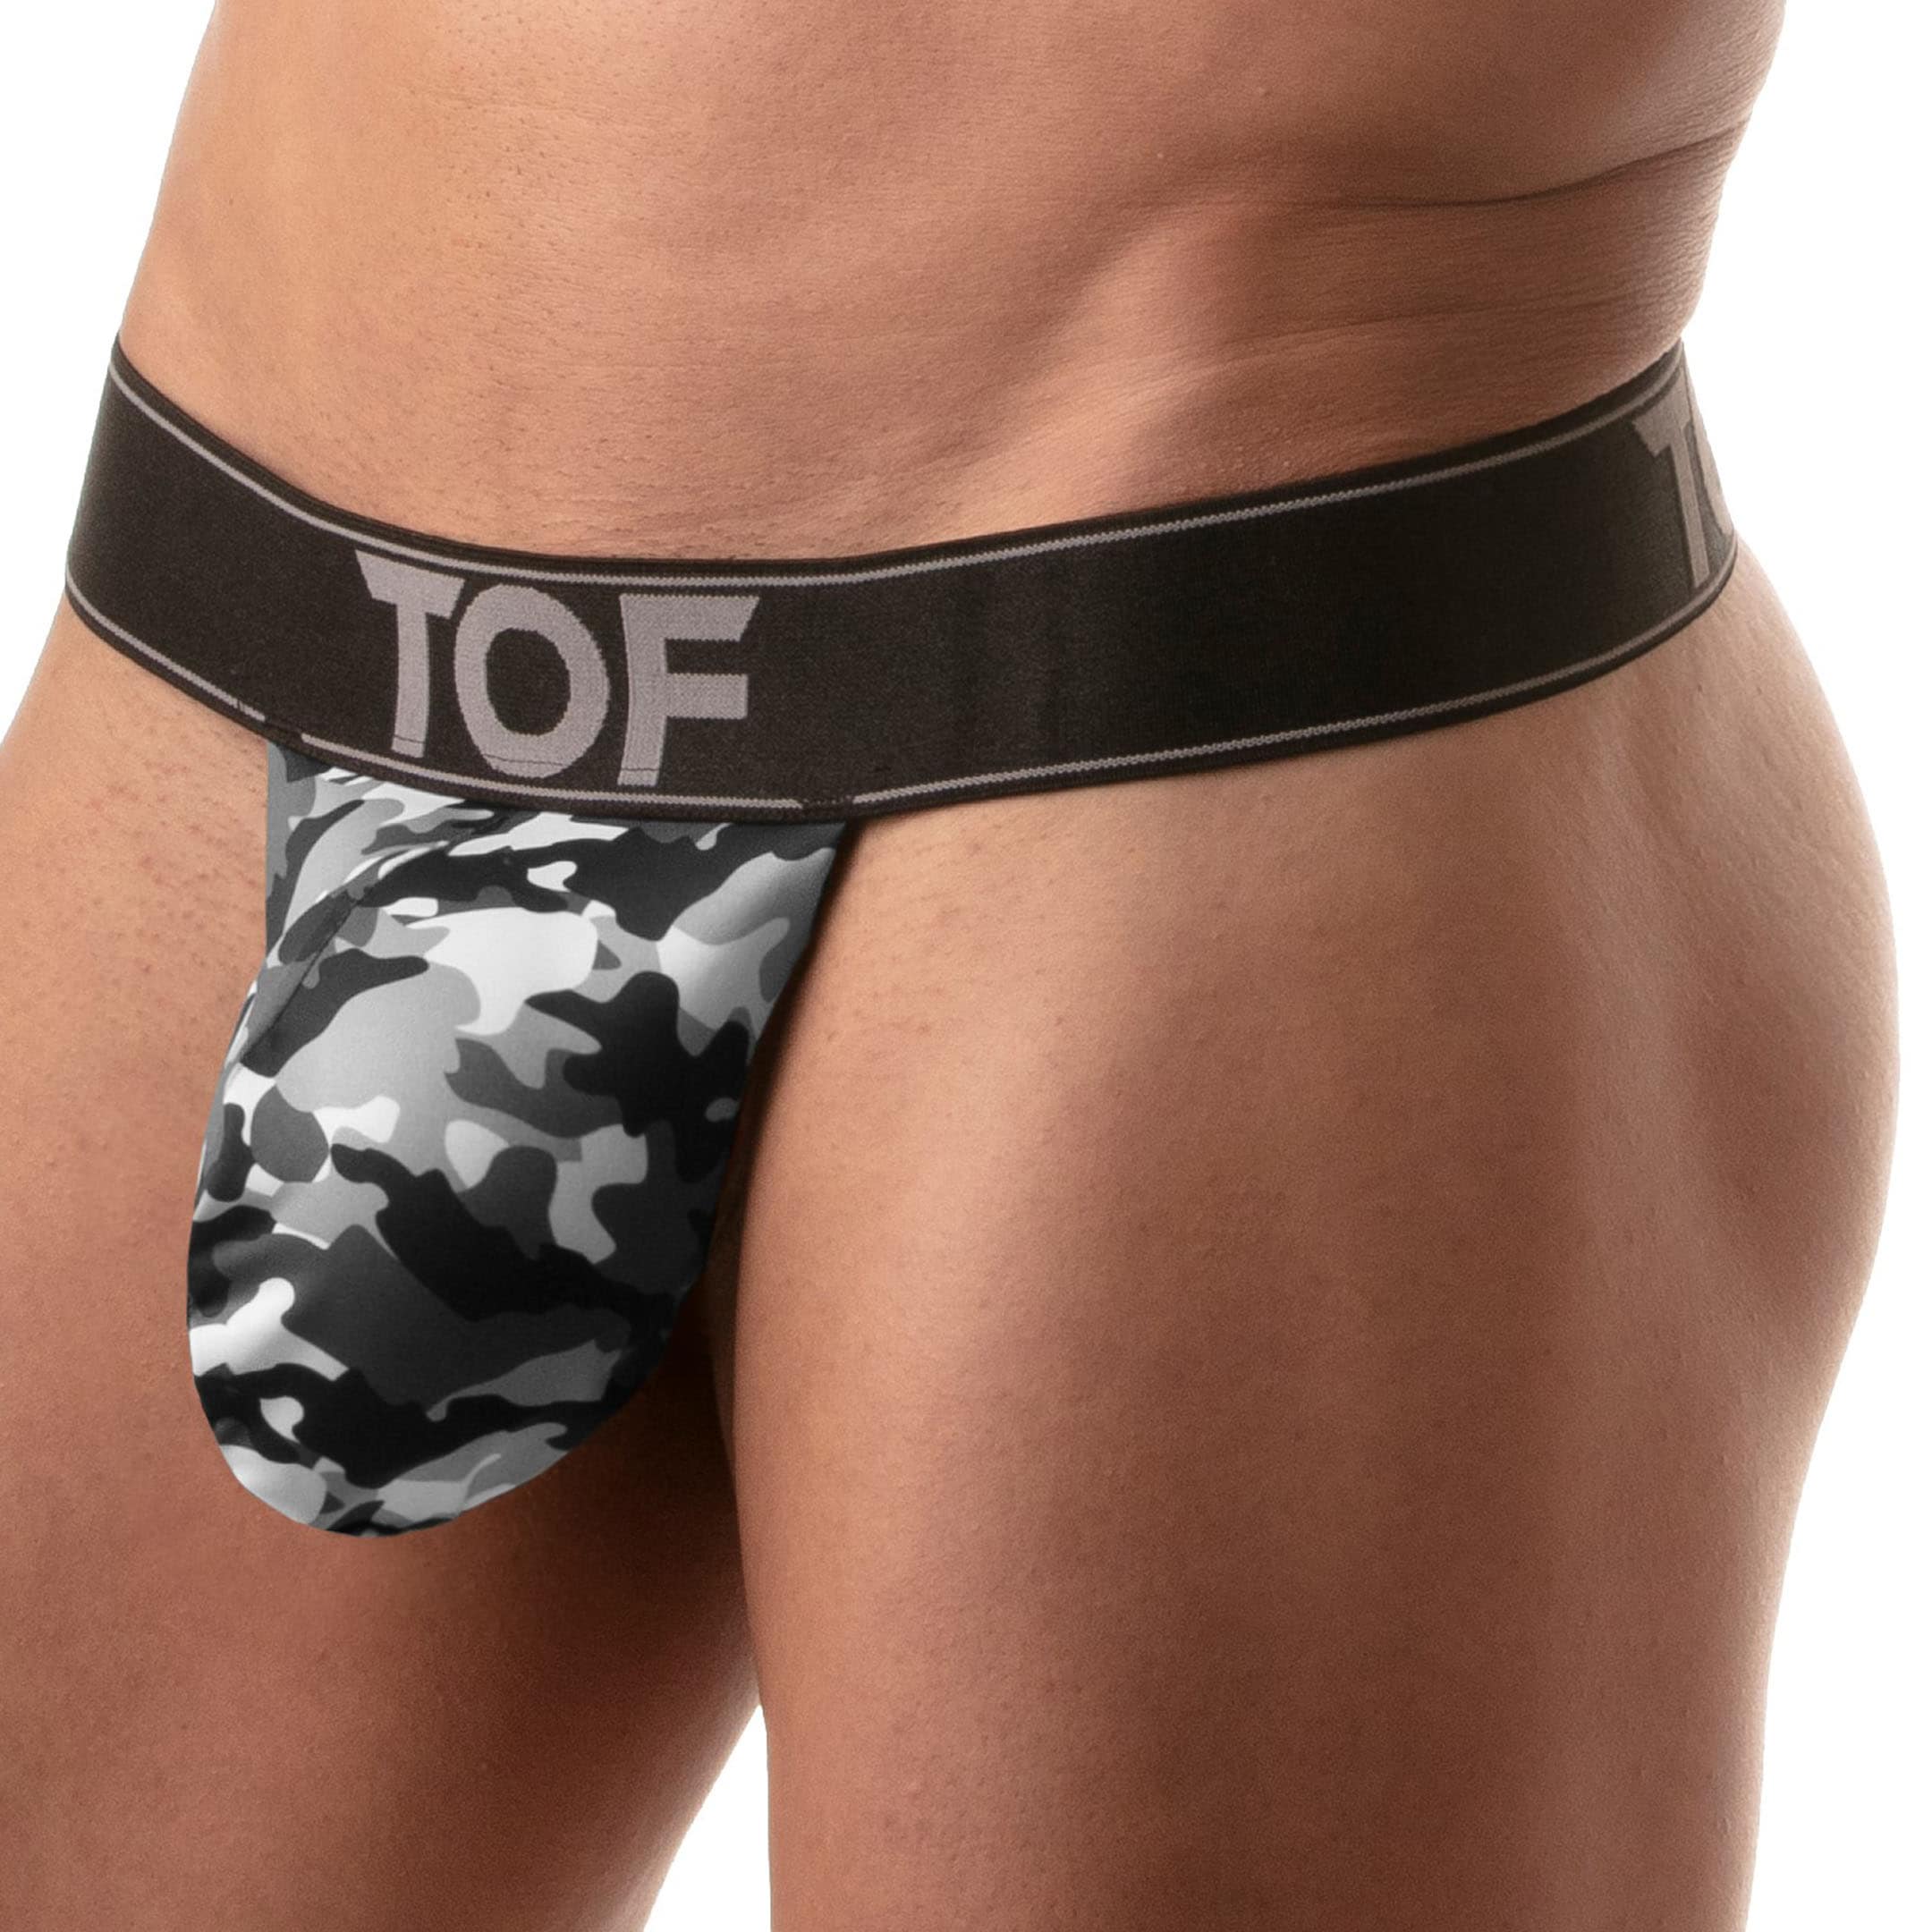 TOF Paris Iconic Backless Thong – Grey Camo S